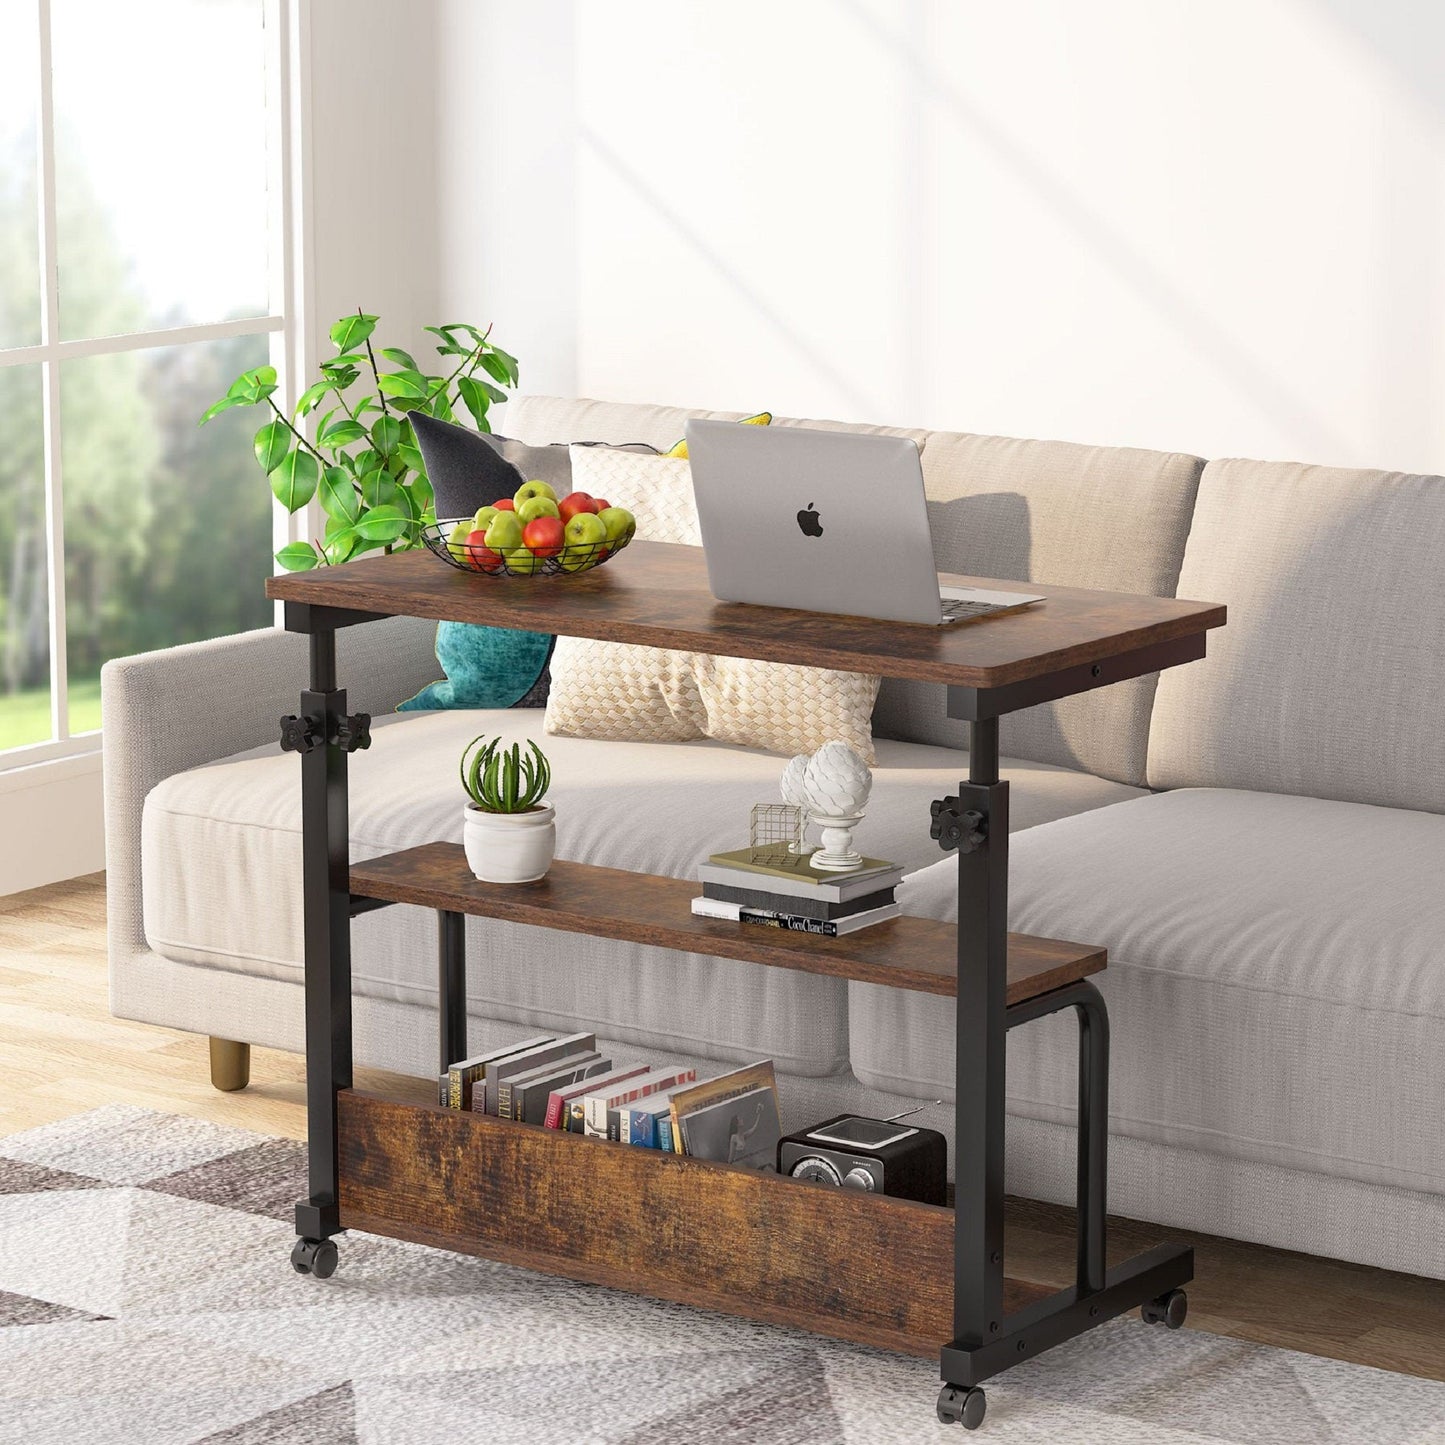 C Table with Wheels, Height Adjustable Bedside Sofa Couch Side Table for Laptop